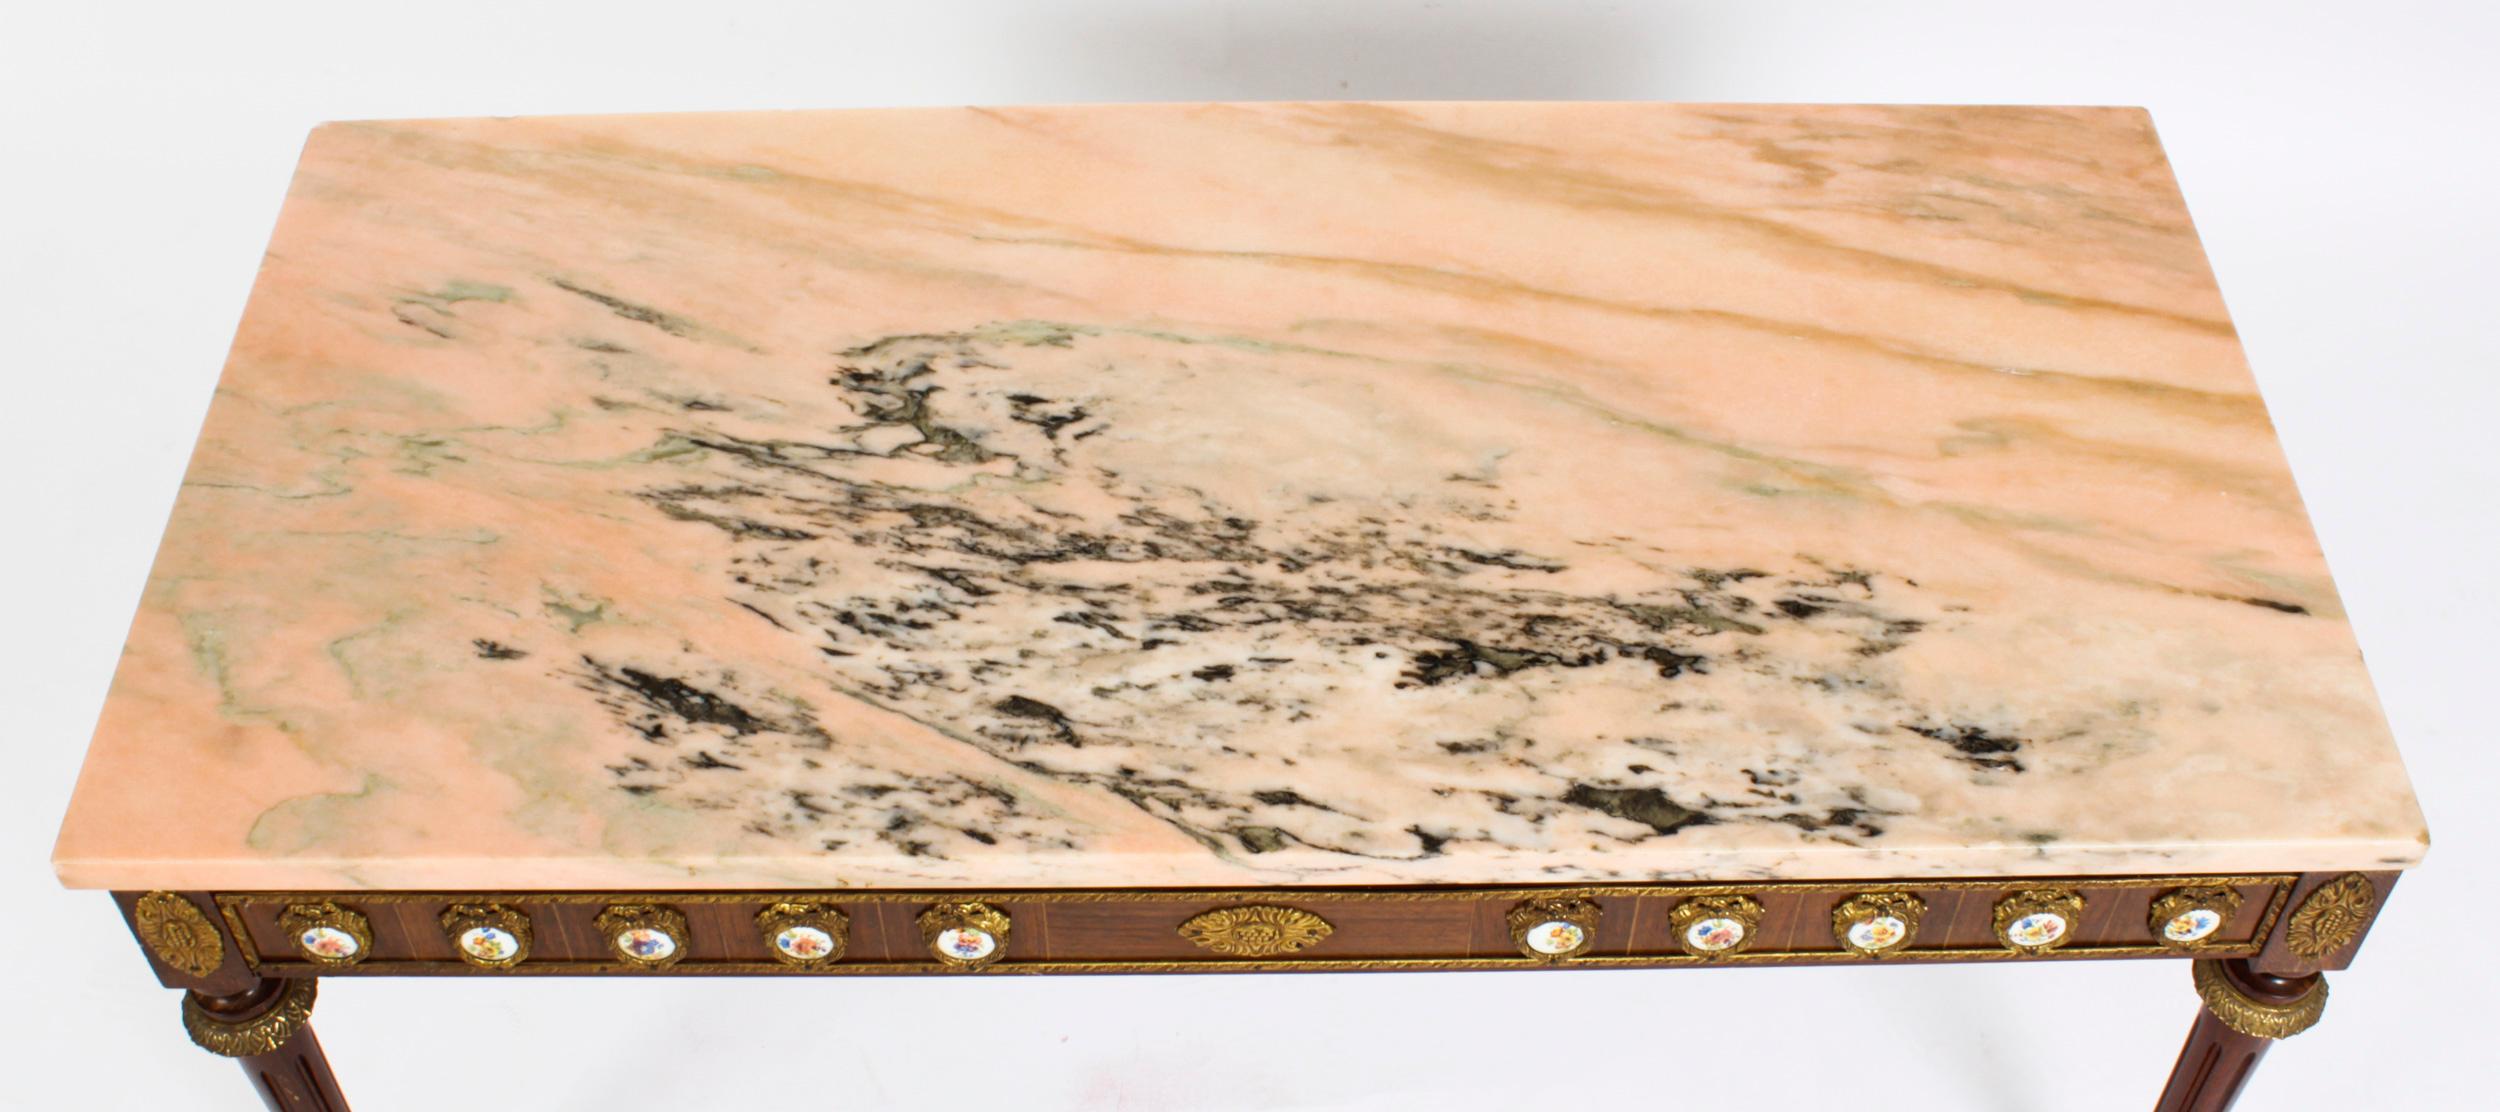 Vintage Ormolu Mounted Coffee Table Marble Top H&L Epstein Style Mid-Century In Good Condition For Sale In London, GB